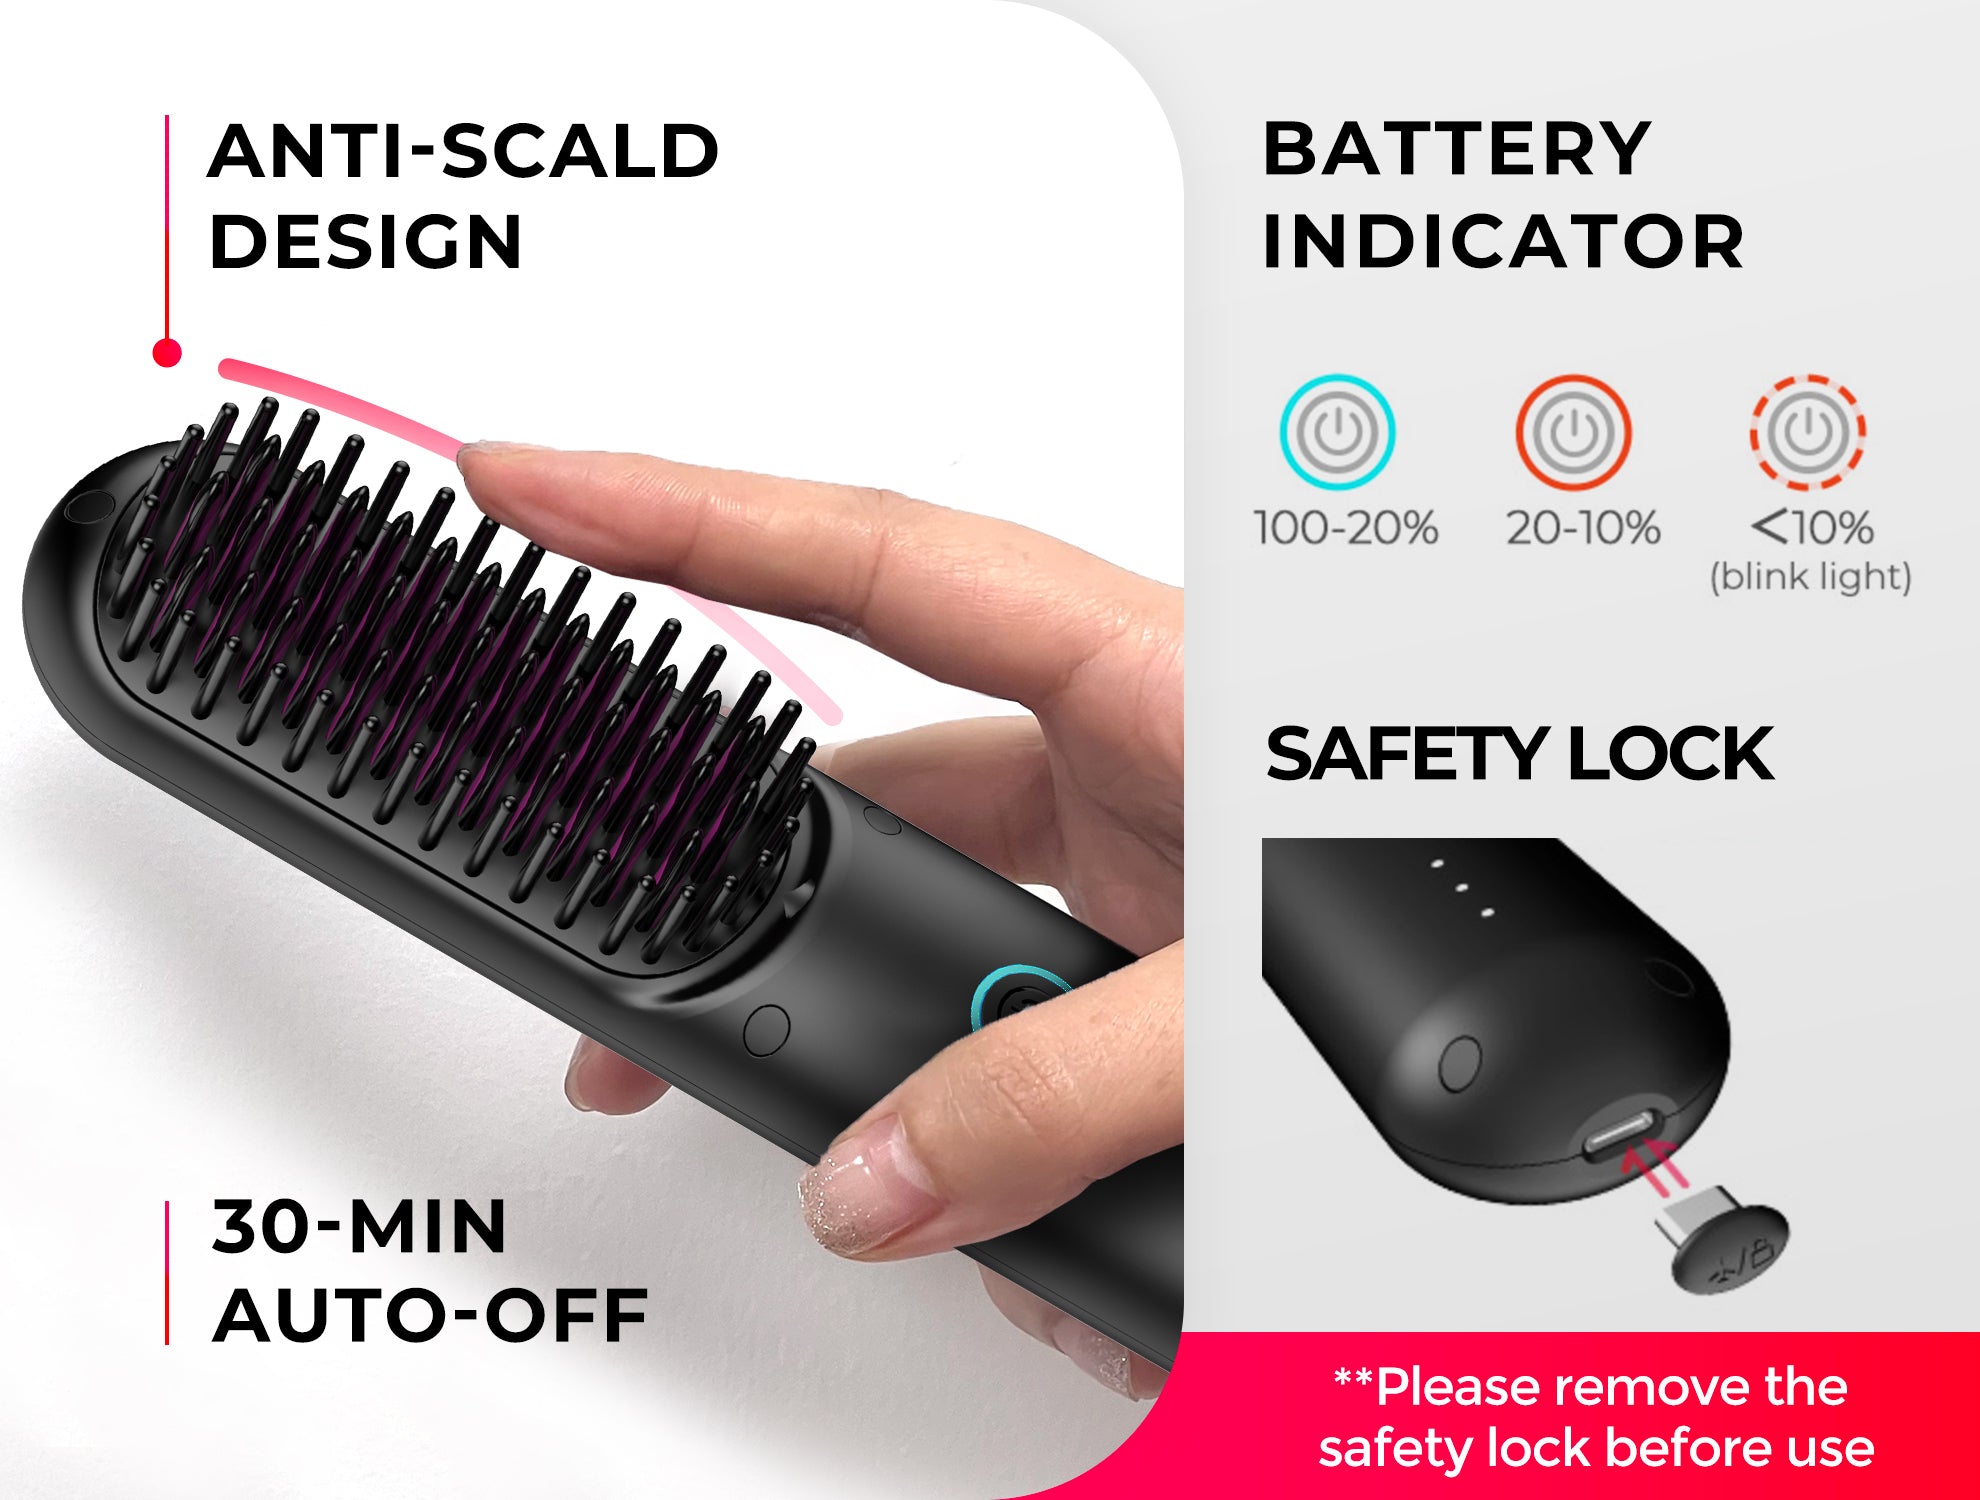  TYMO Porta Cordless Hair Straightener Brush, Portable Mini  Straightening Brush for Travel, Negative Ion Hot Comb Hair Straightener for  Women, Lightweight to Carry Out, USB Rechargeable, Anti-Scald : Beauty 